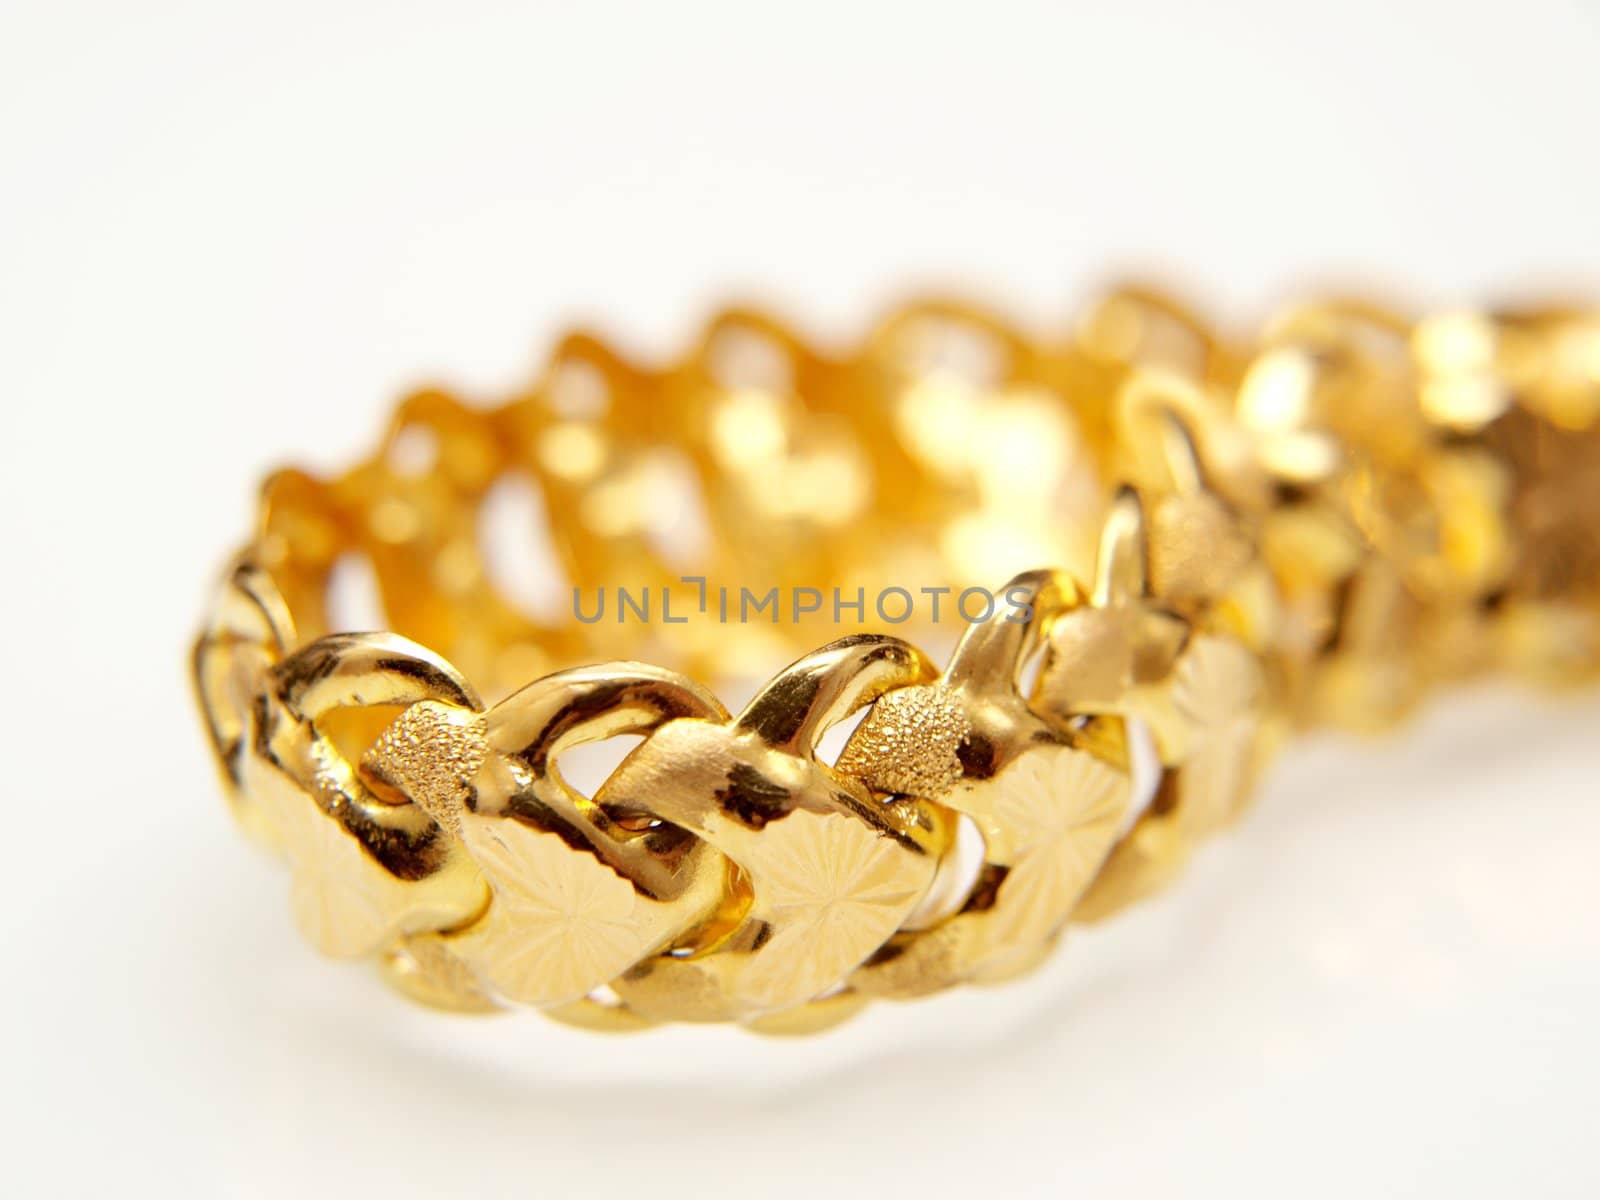 Yellow gold jewelry, isolated towards white background